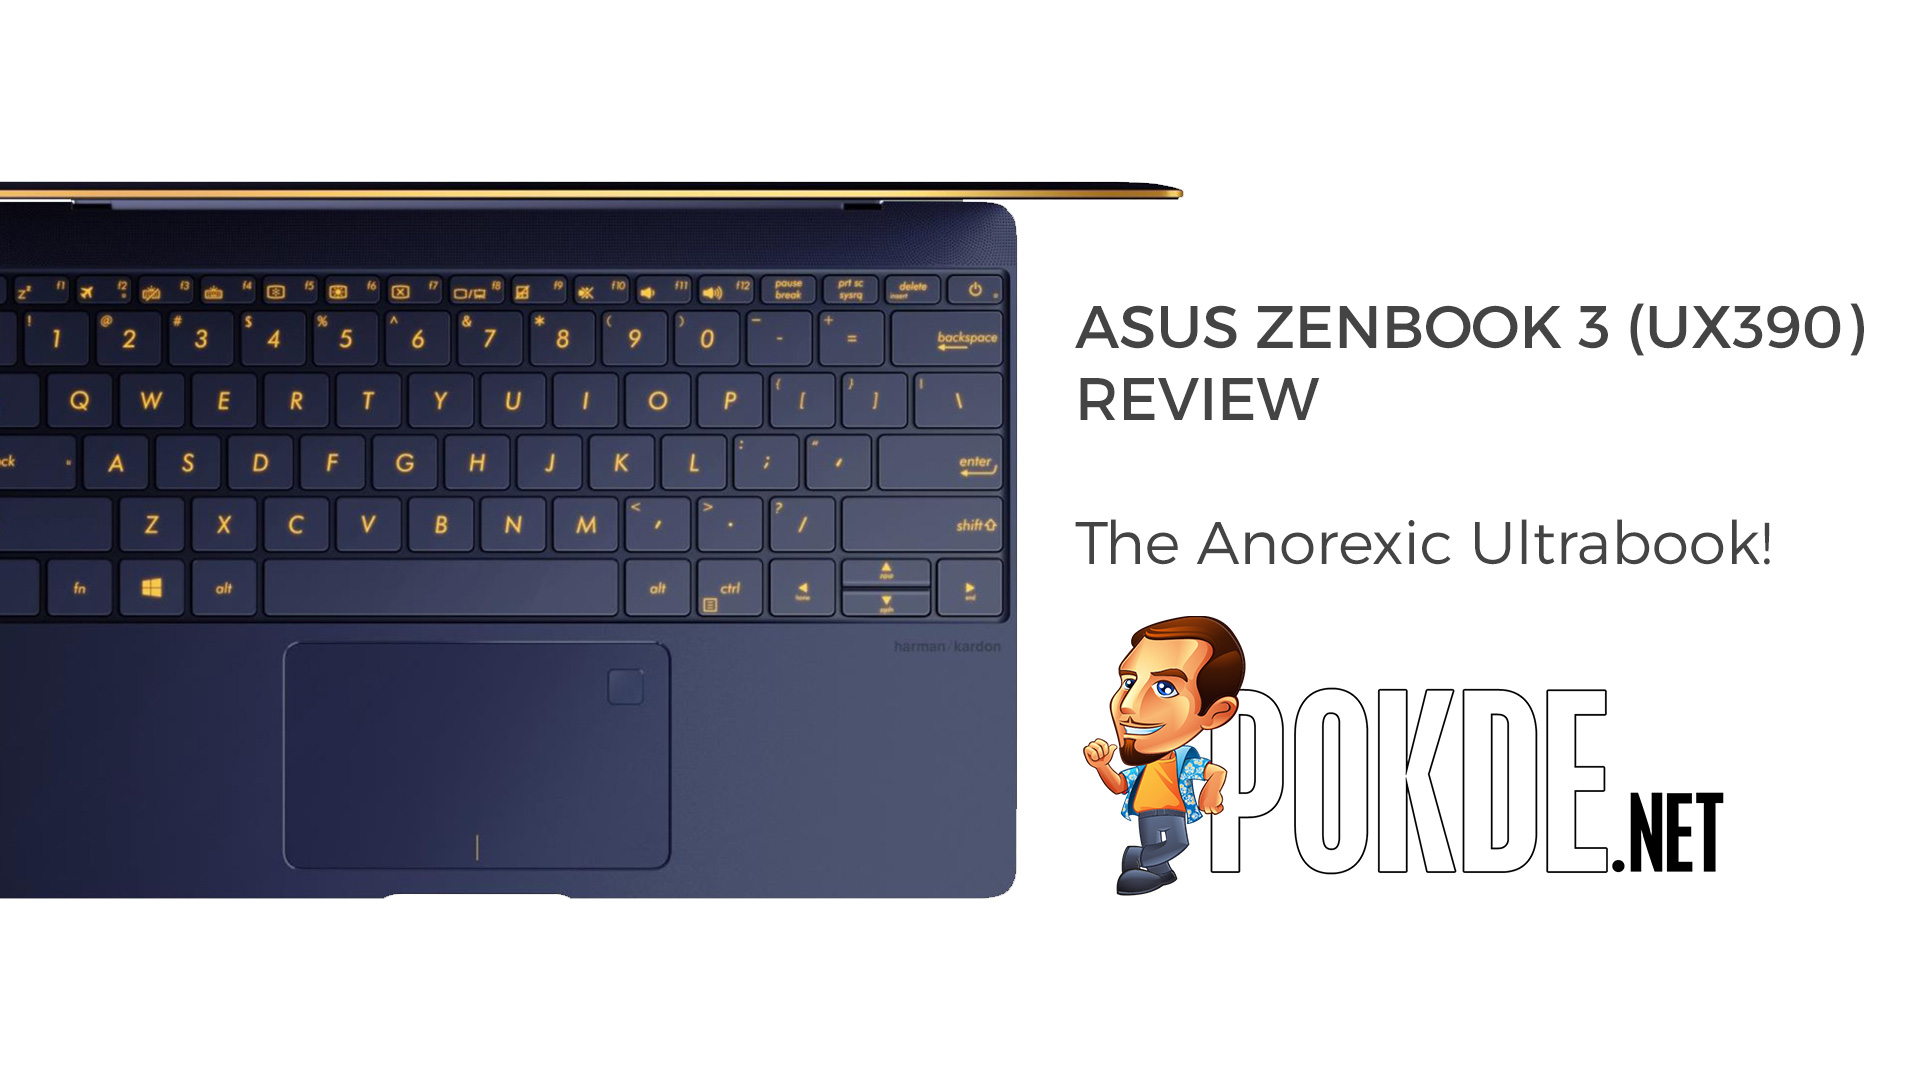 Asus ZenBook 3 (UX390) Review - The Anorexic Ultrabook 23